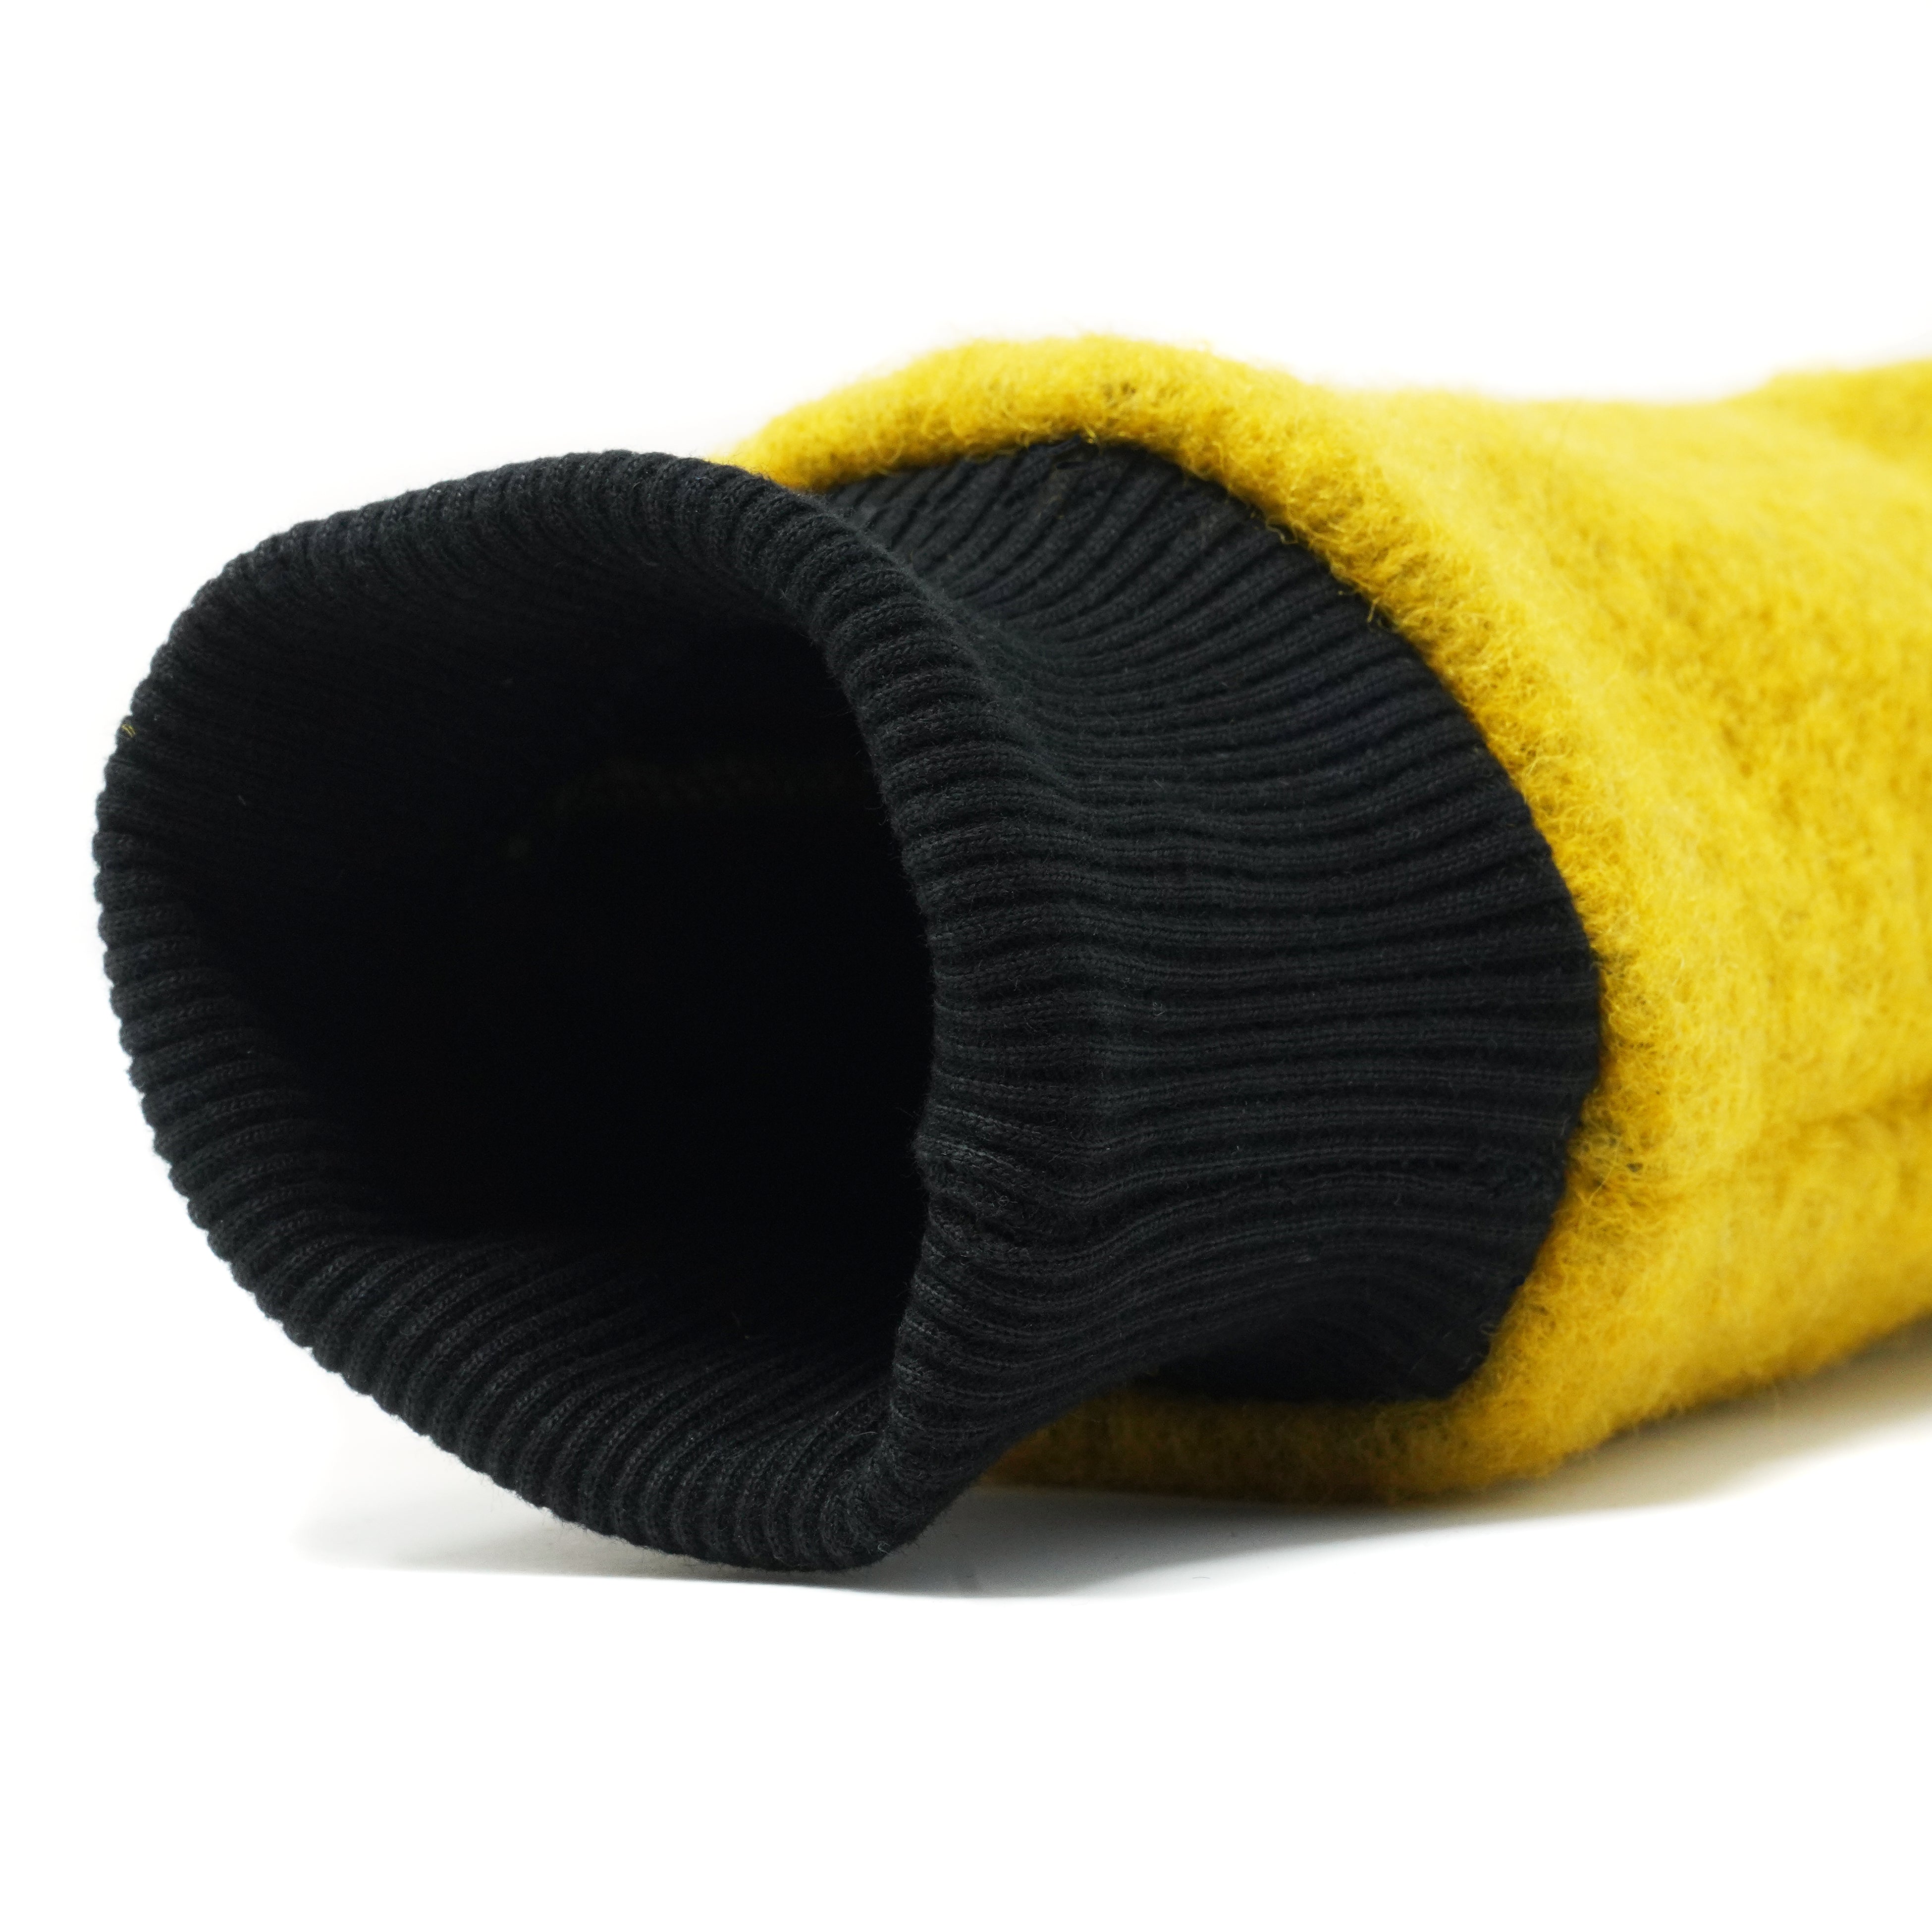 MITTENS - LIMITED EDITION - Yellow 